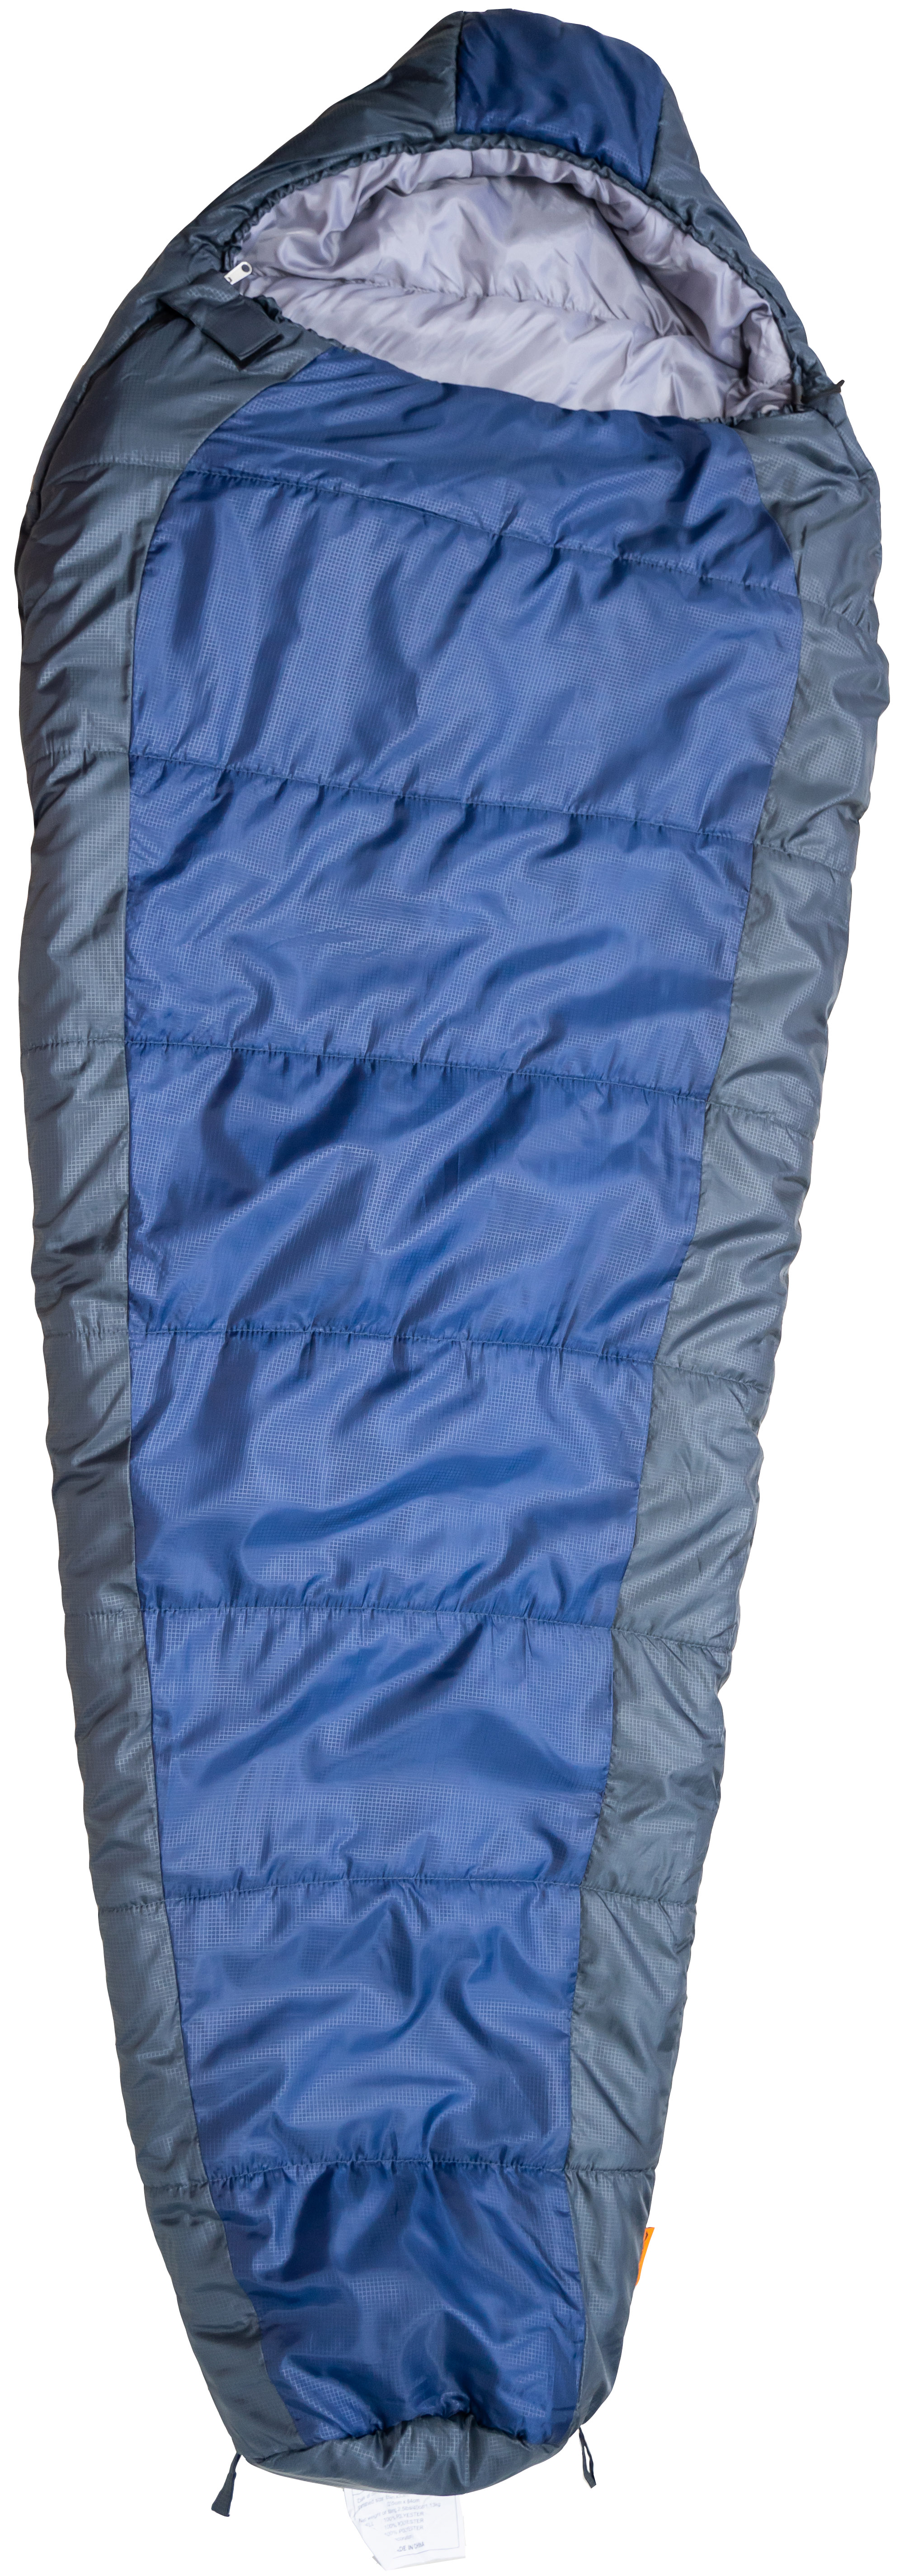 Ozark Trail 30F with Soft Liner Camping Mummy Sleeping Bag for Adults, Blue - image 1 of 13